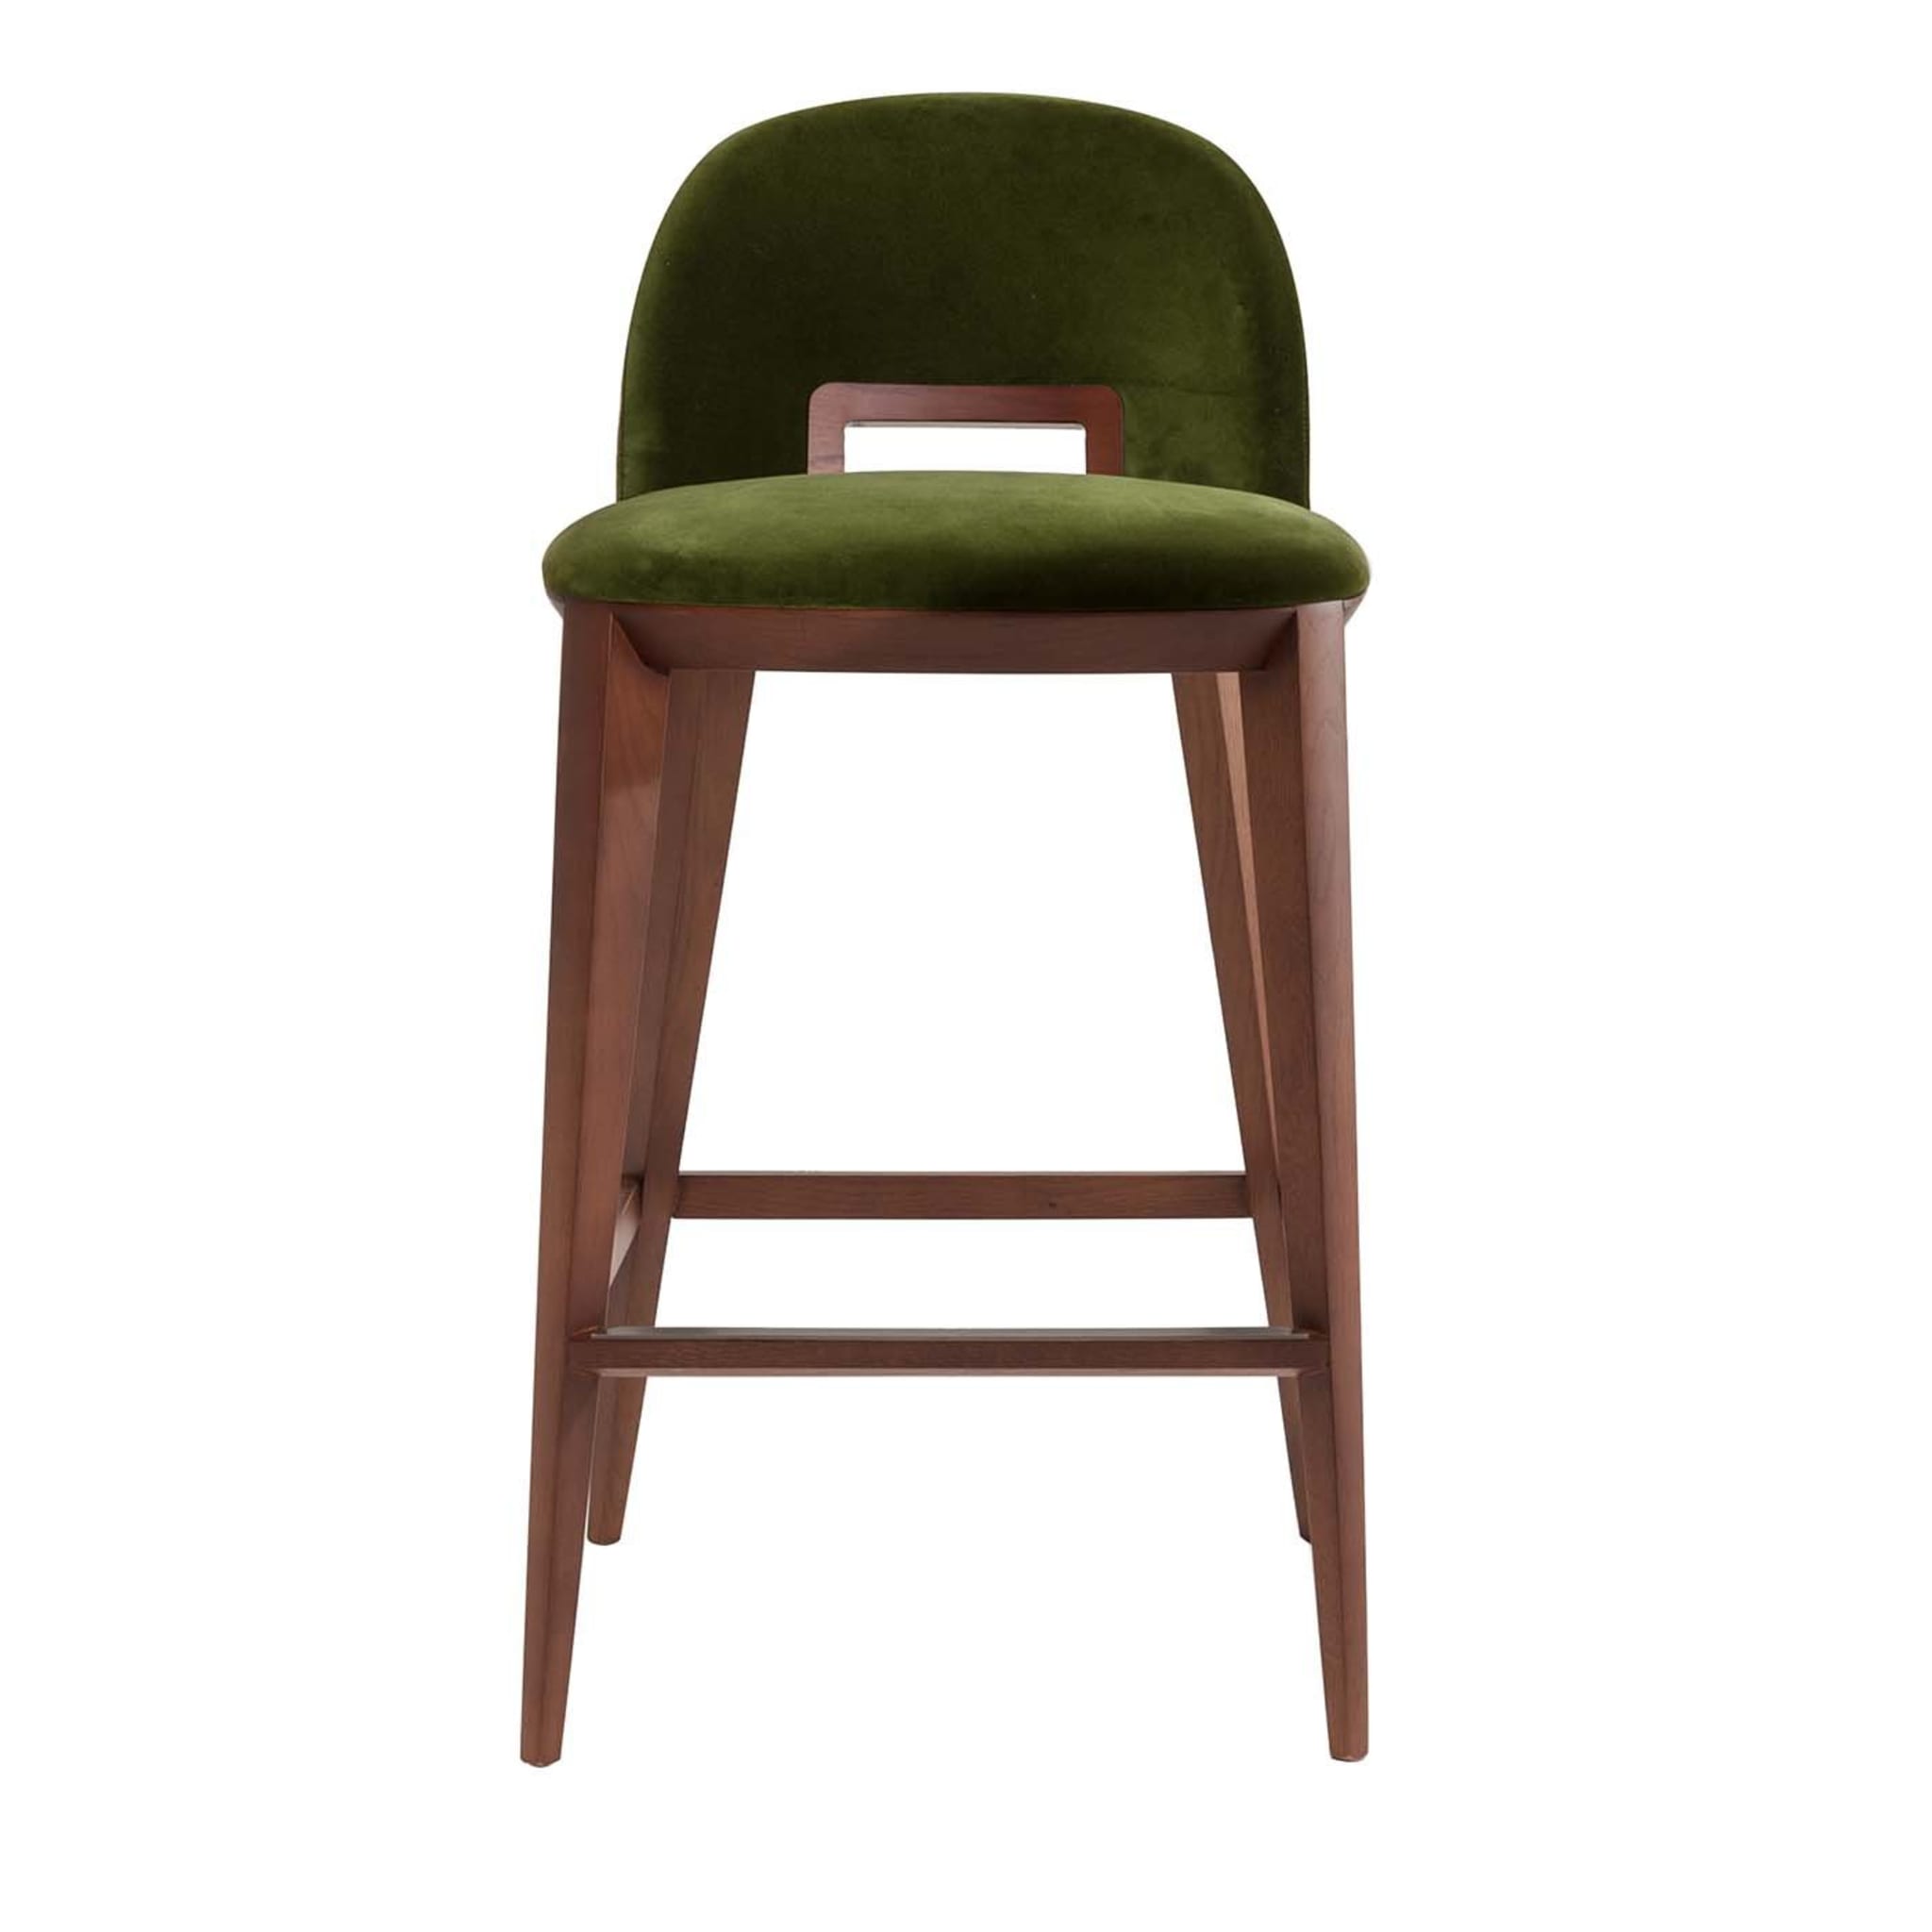 Margaret Green Stool by Cesare Arosio - Main view